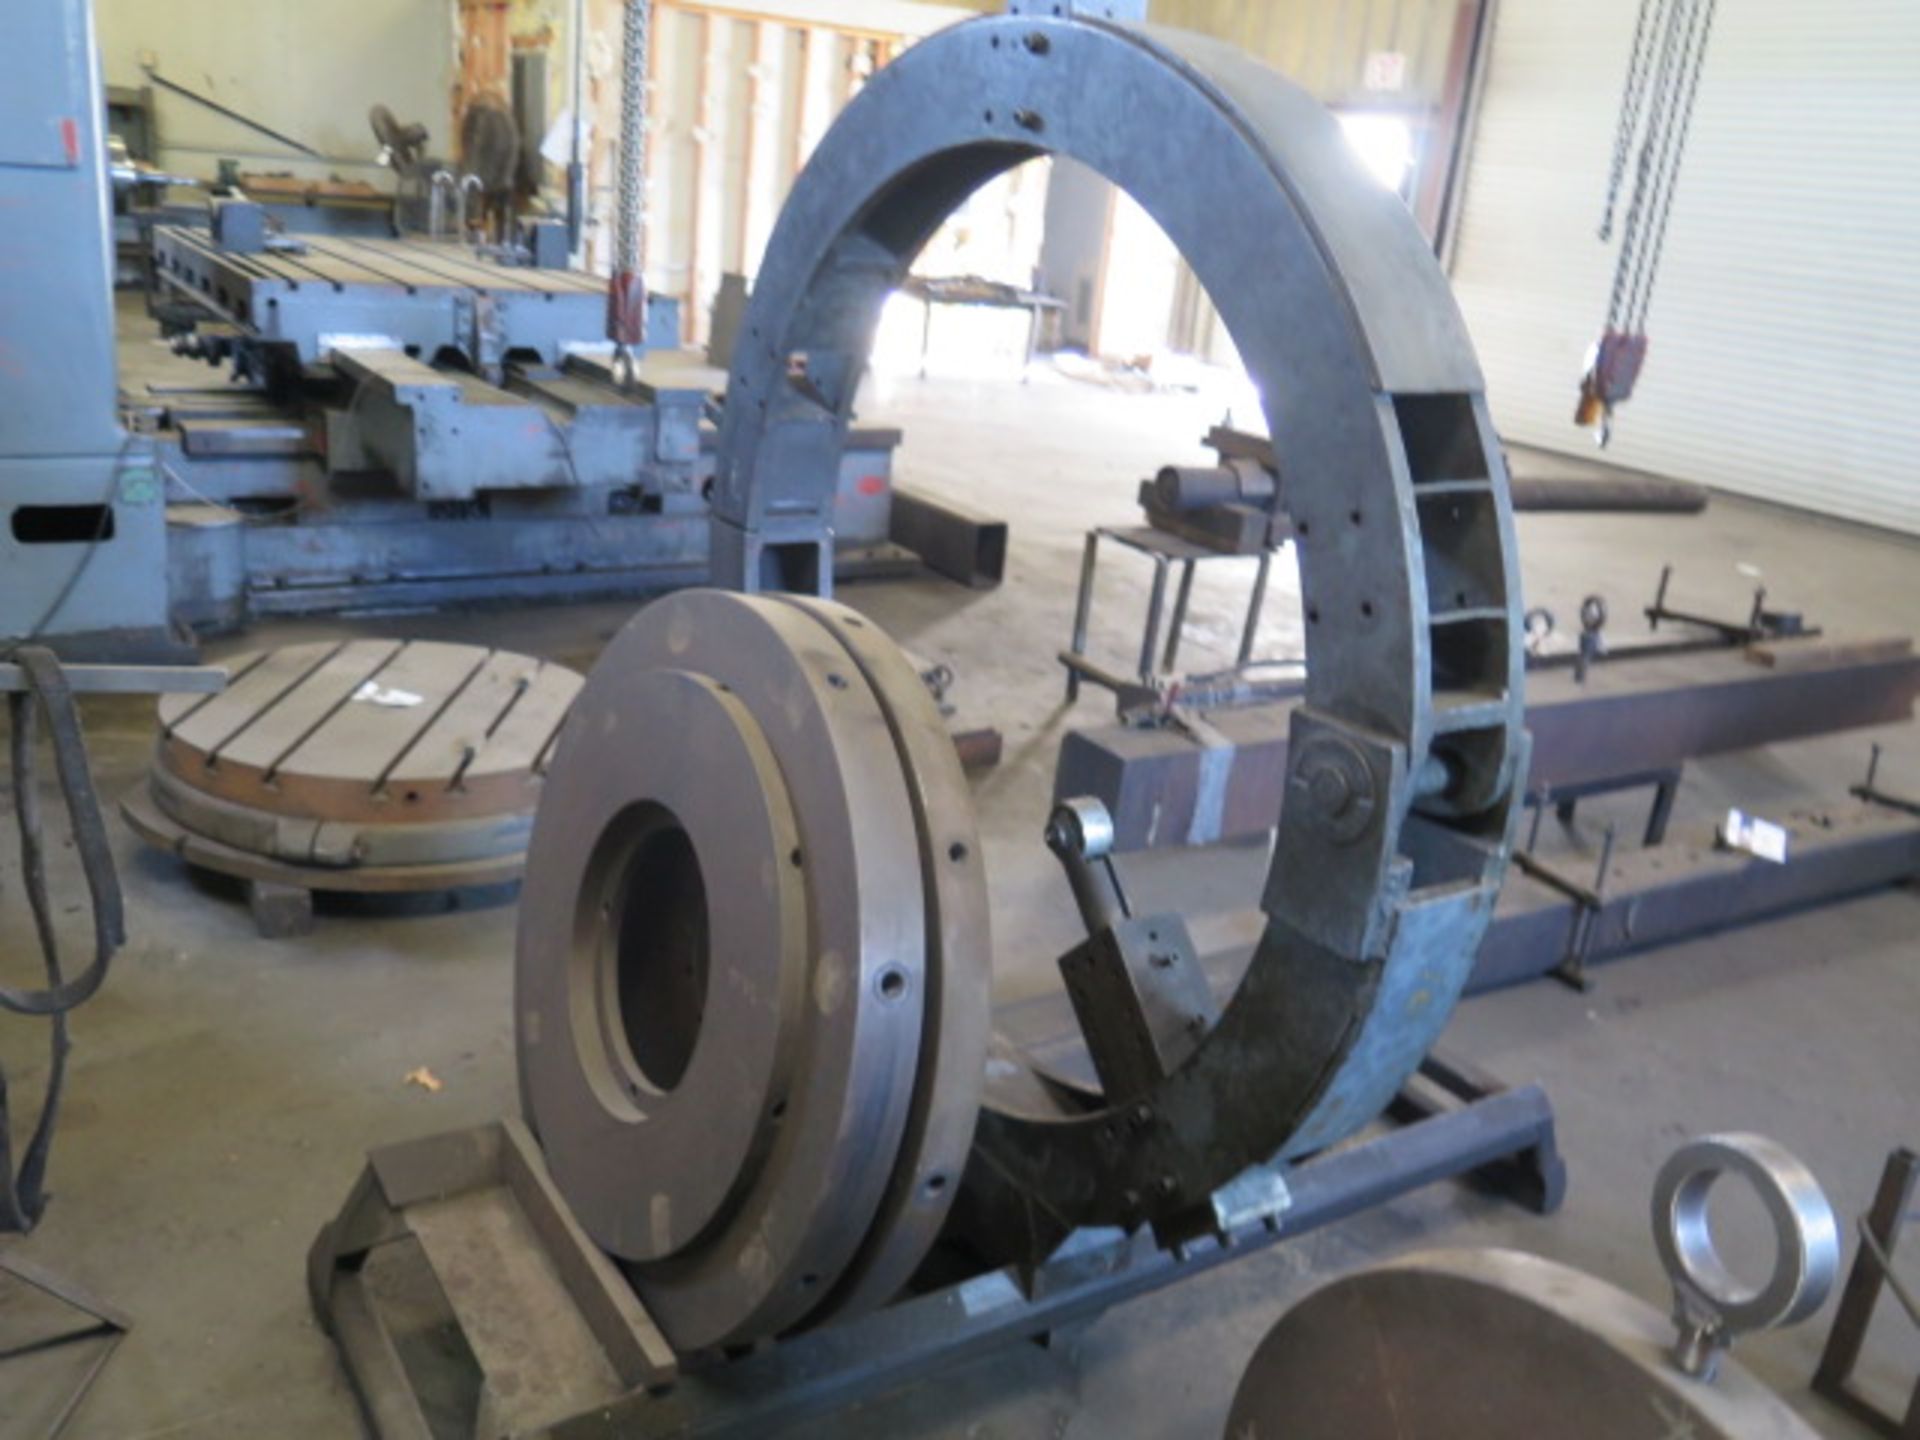 Axelson 32 48” x 168” Geared Head Lathe s/n 1644 w/ 16” Extension, 6-555 RPM, Inch Thrd, SOLD AS IS - Image 17 of 21